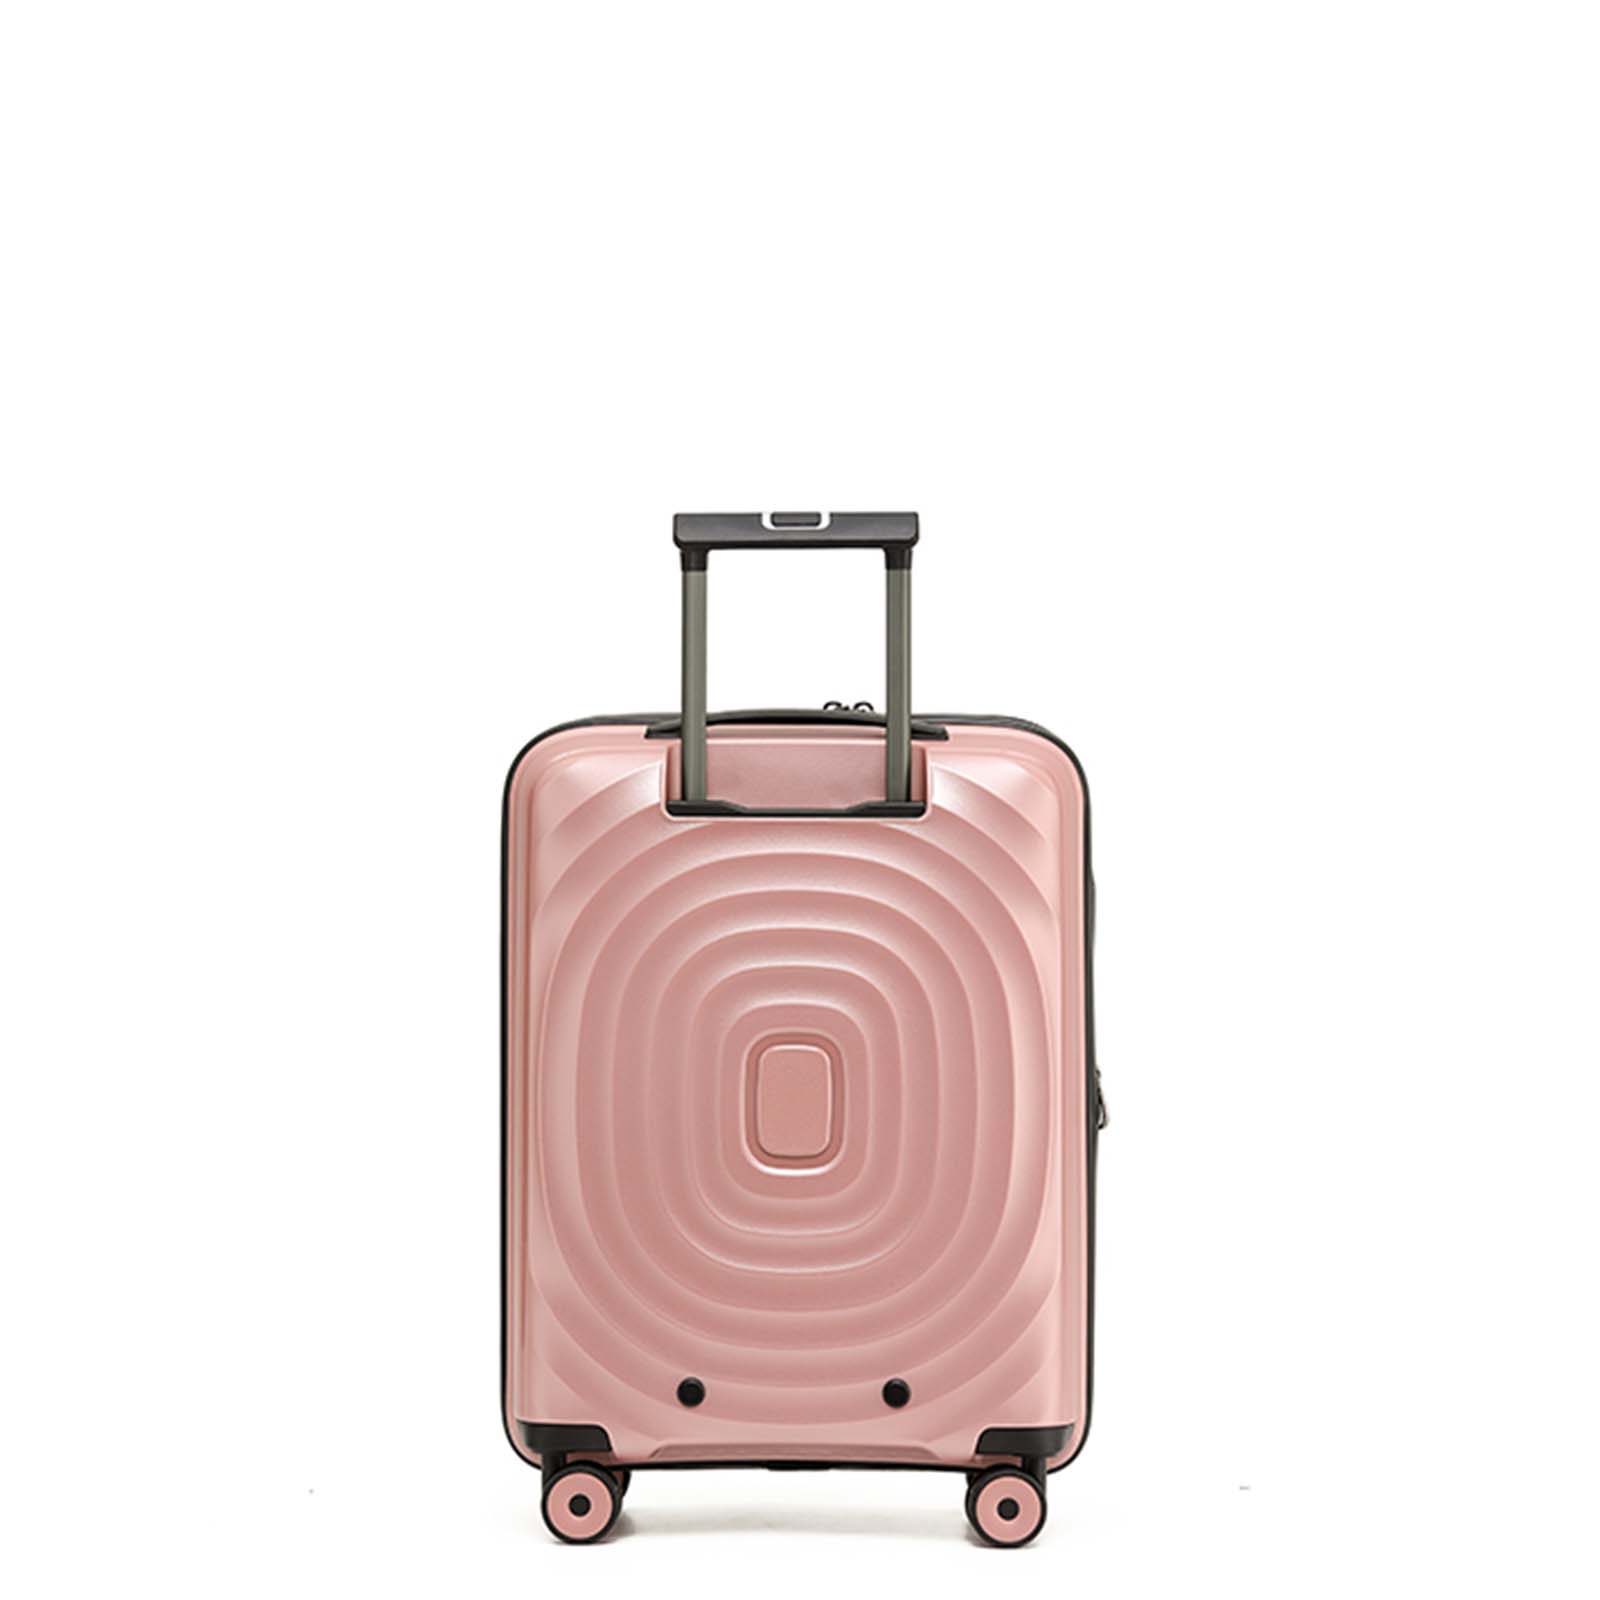 tosca-eclipse-4-wheel-55cm-carry-on-suitcase-rose-gold-back